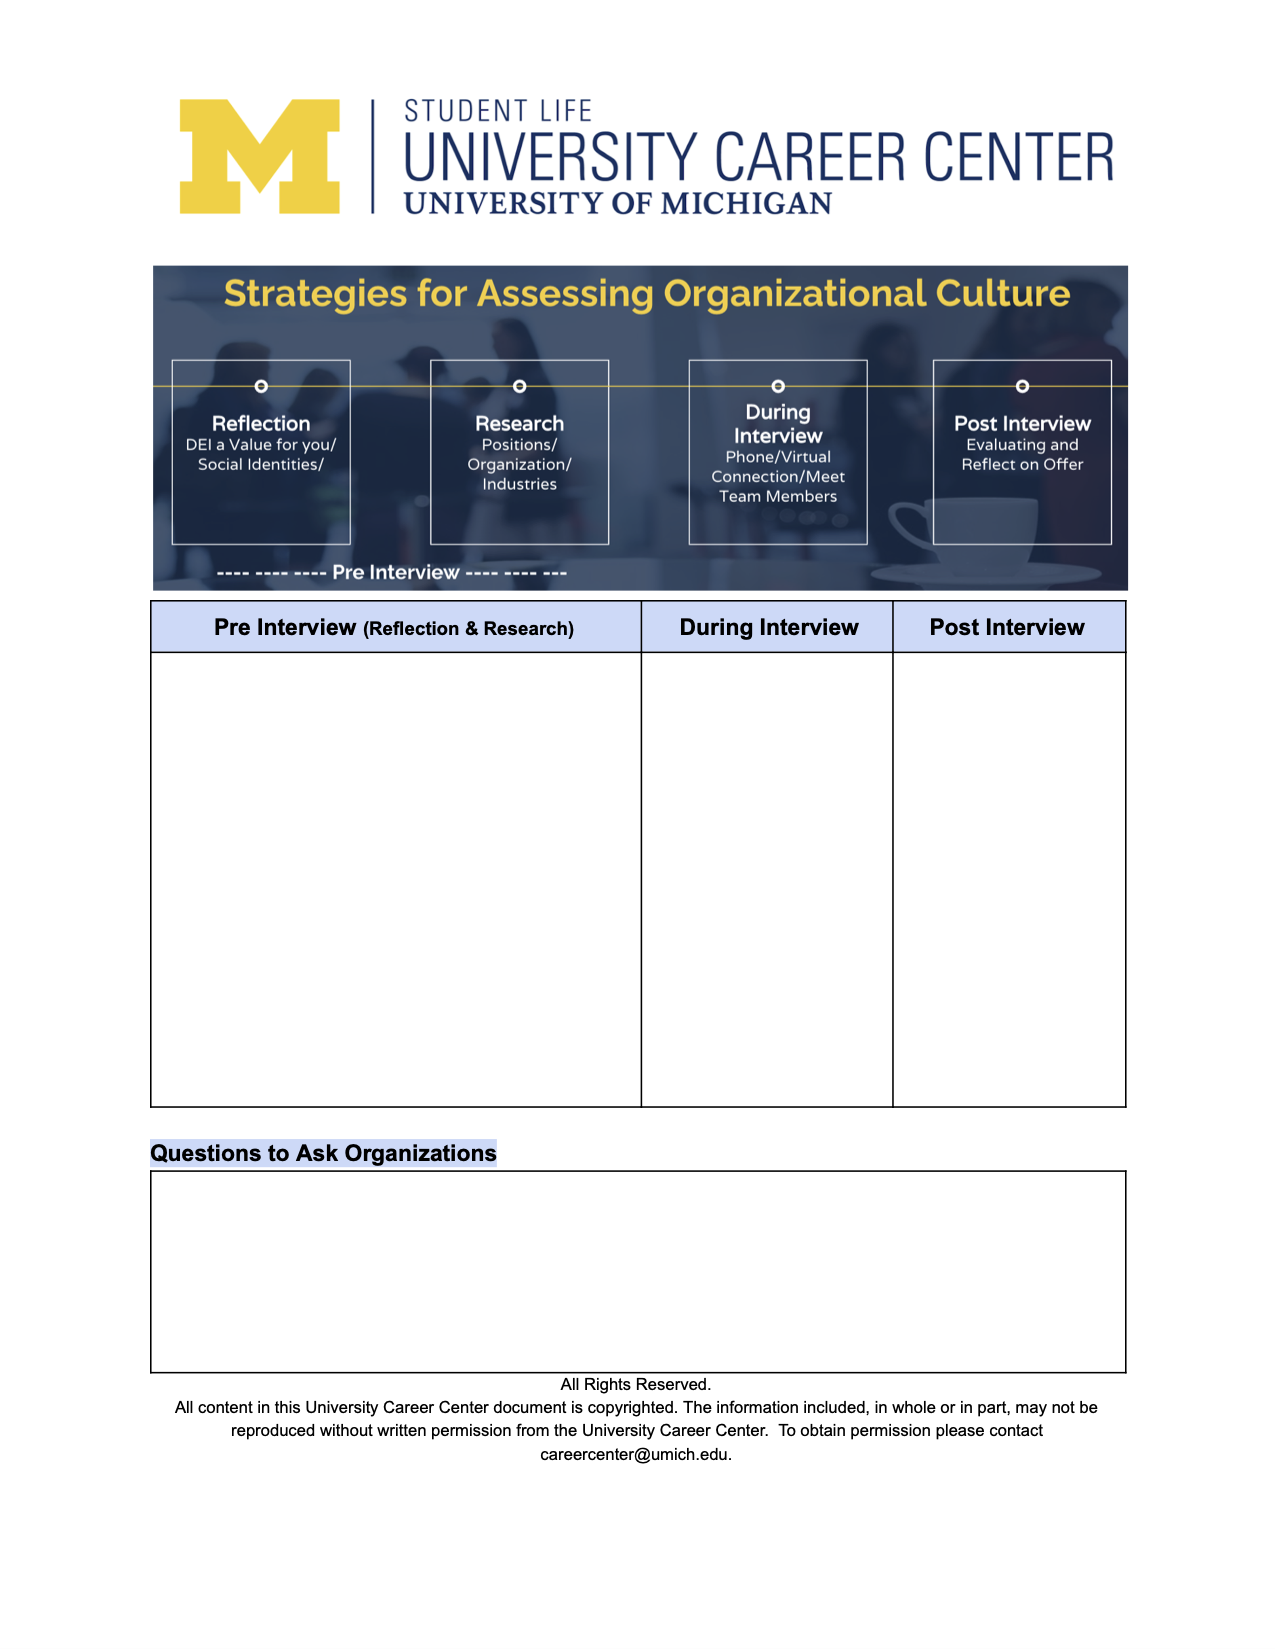 Strategies for Assessing Organization Culture